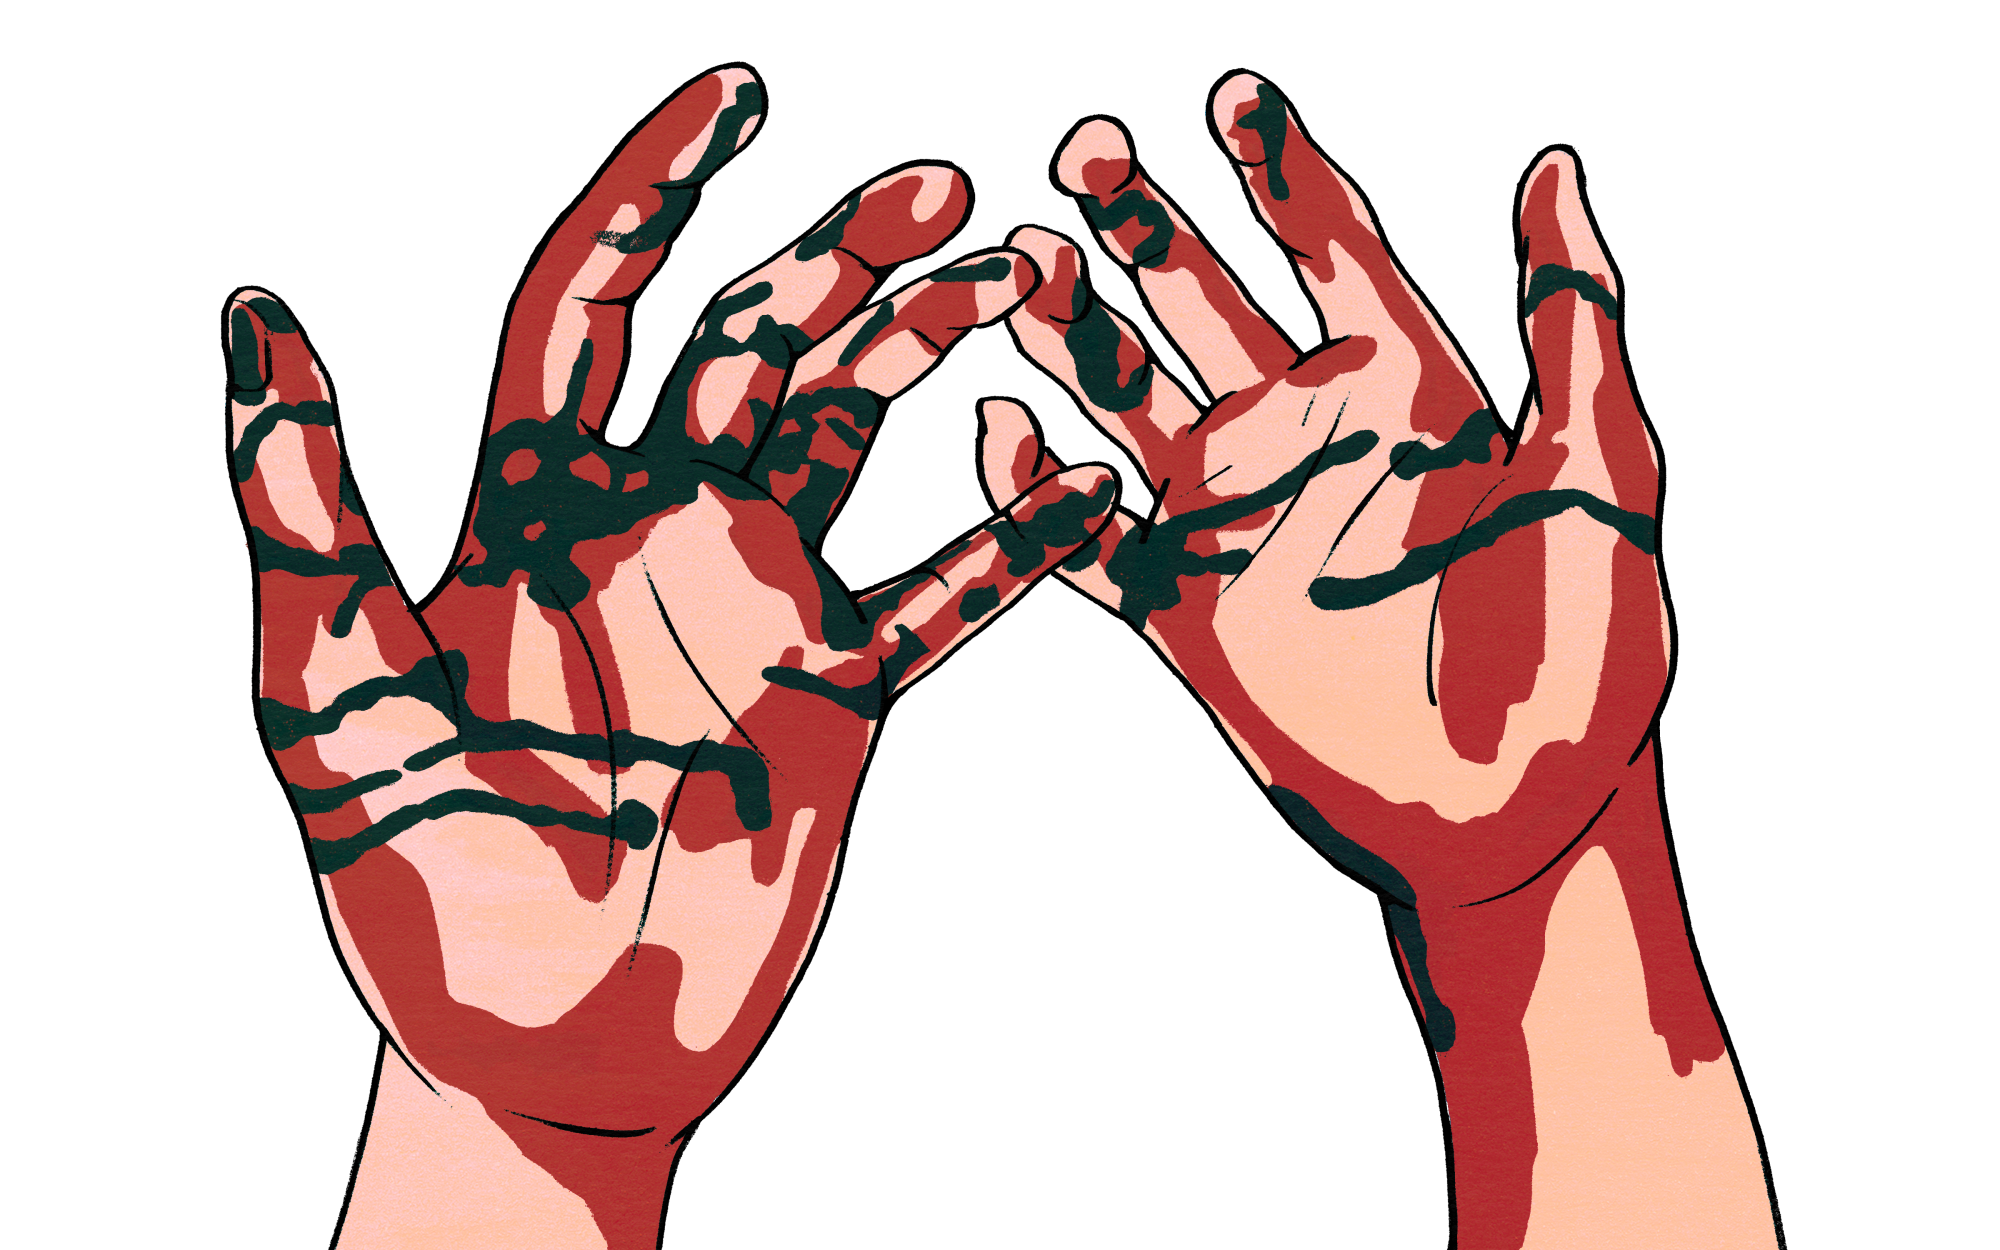 An illustration of hands covered in blood.